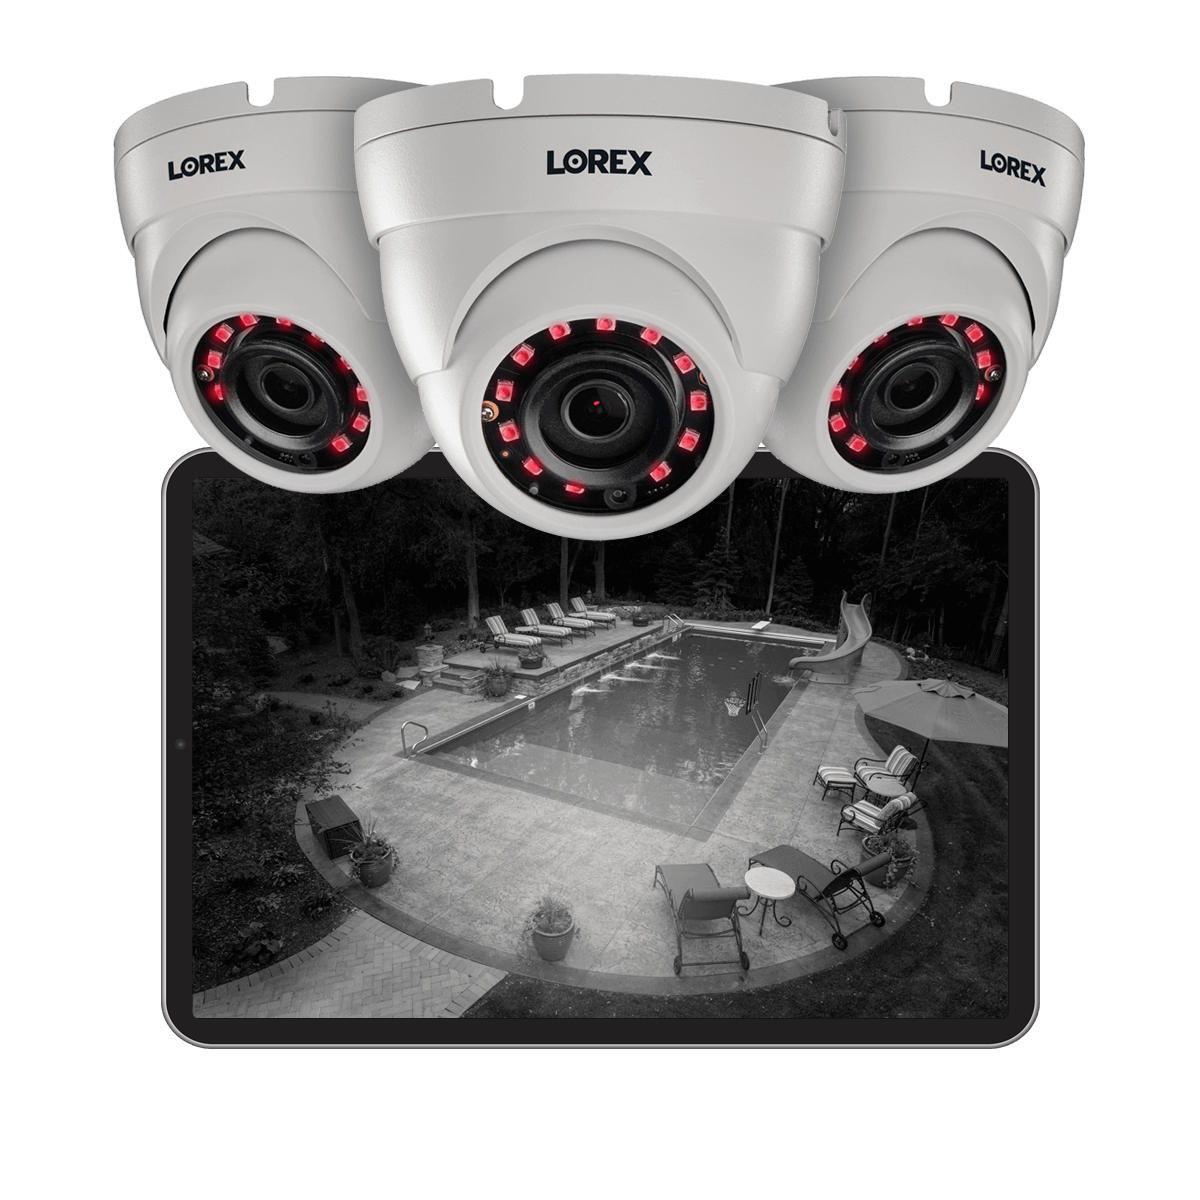 Do not fear the dark with 1080p HD night vision security cameras from Lorex